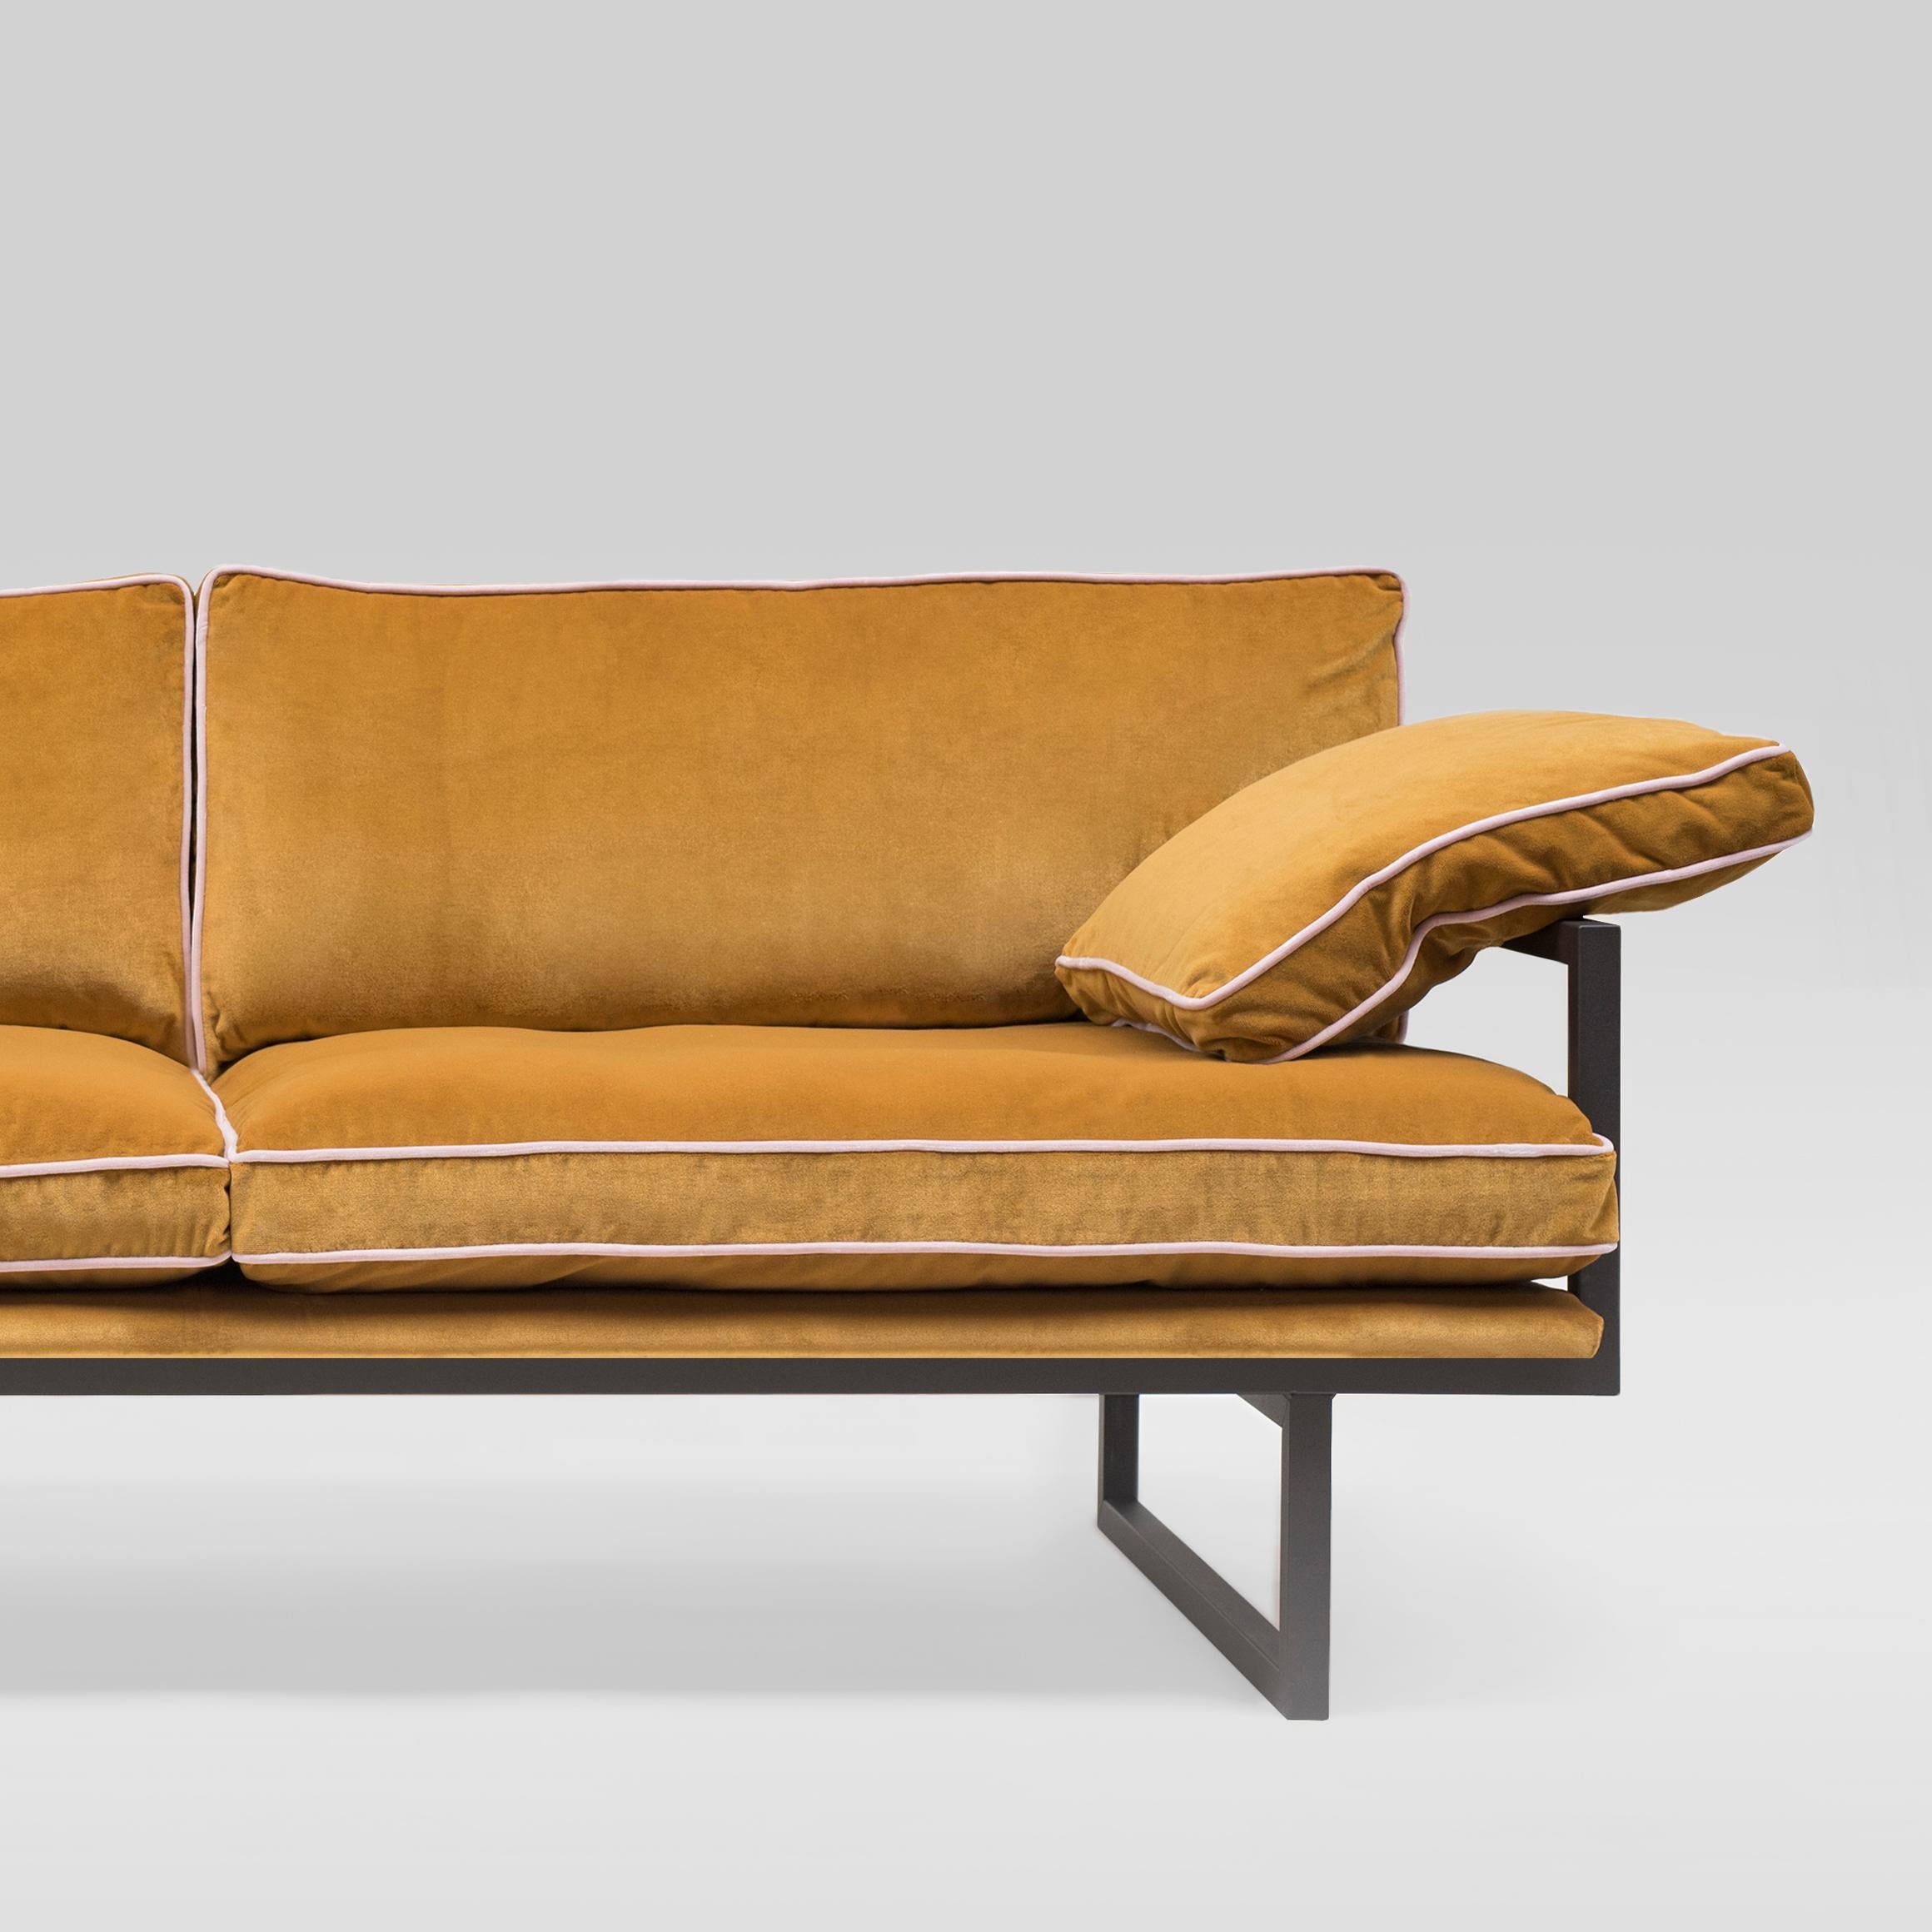 Sofa designed by Peter Ghyczy in 2009.
Manufactured by Ghyczy (Netherlands)

This sofa has an airy and light weight architectural construction. The GP01 is designed with an adjustable backrest, which allows to adjust the seat depth.

Material